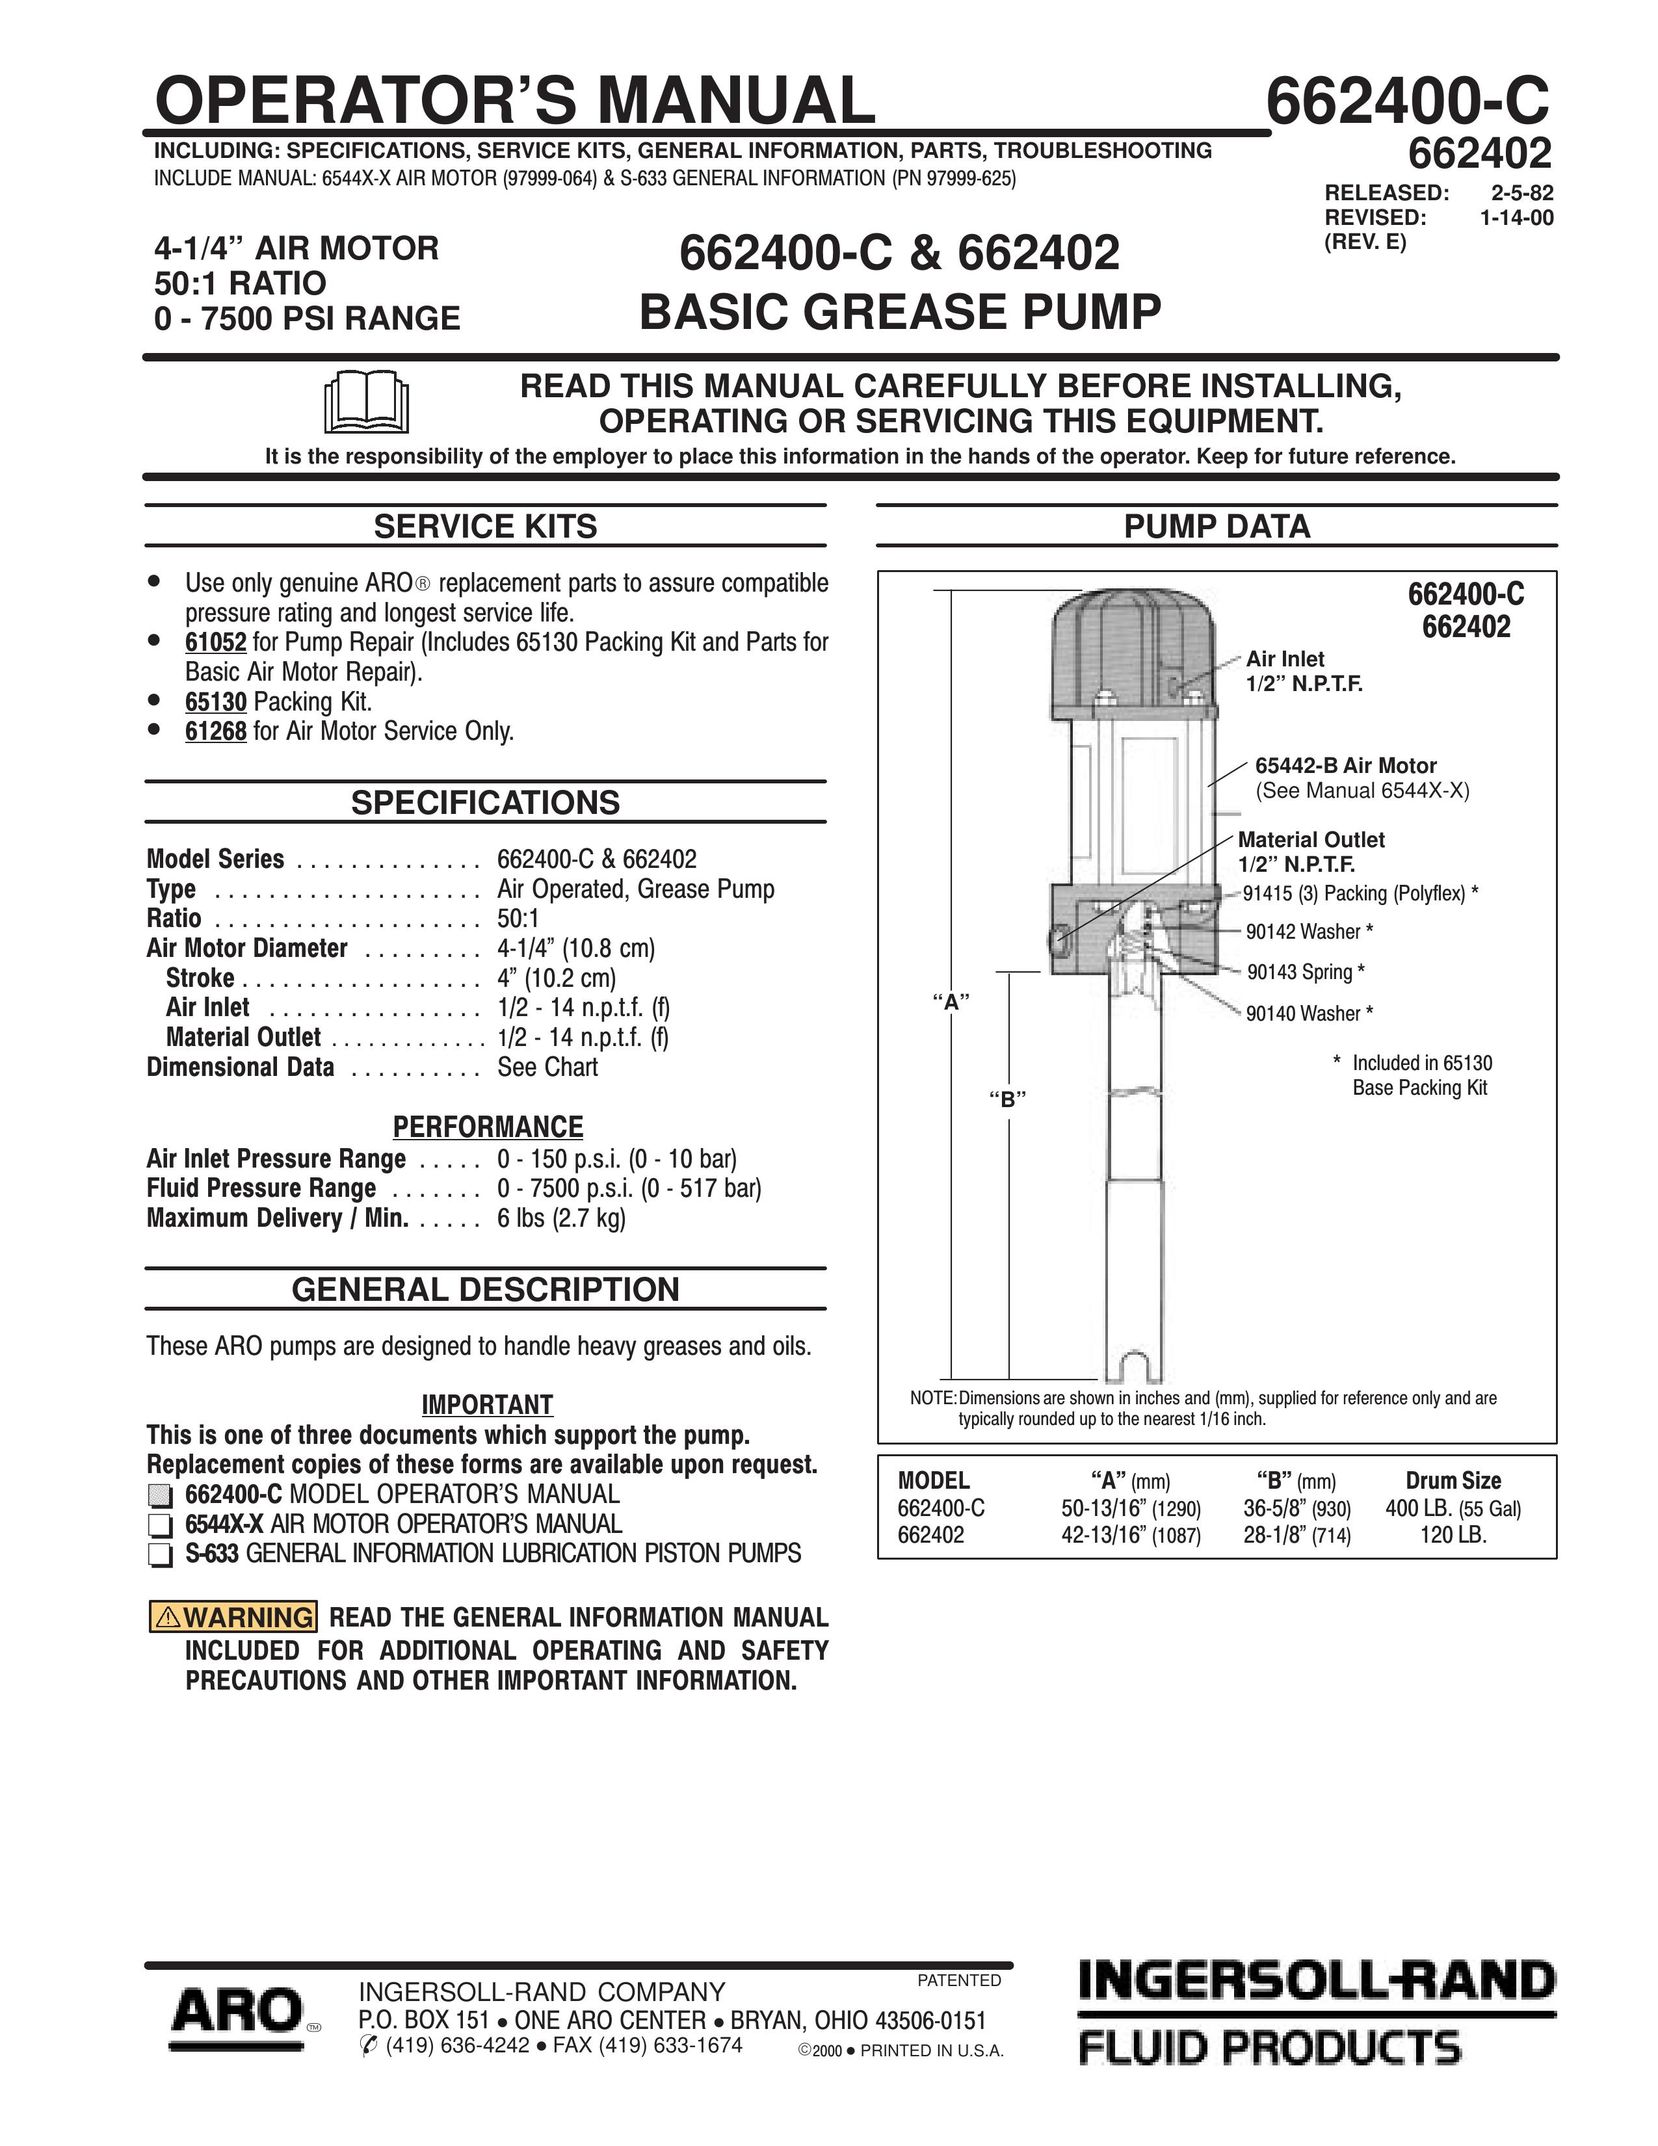 Ingersoll-Rand 662400-C Septic System User Manual